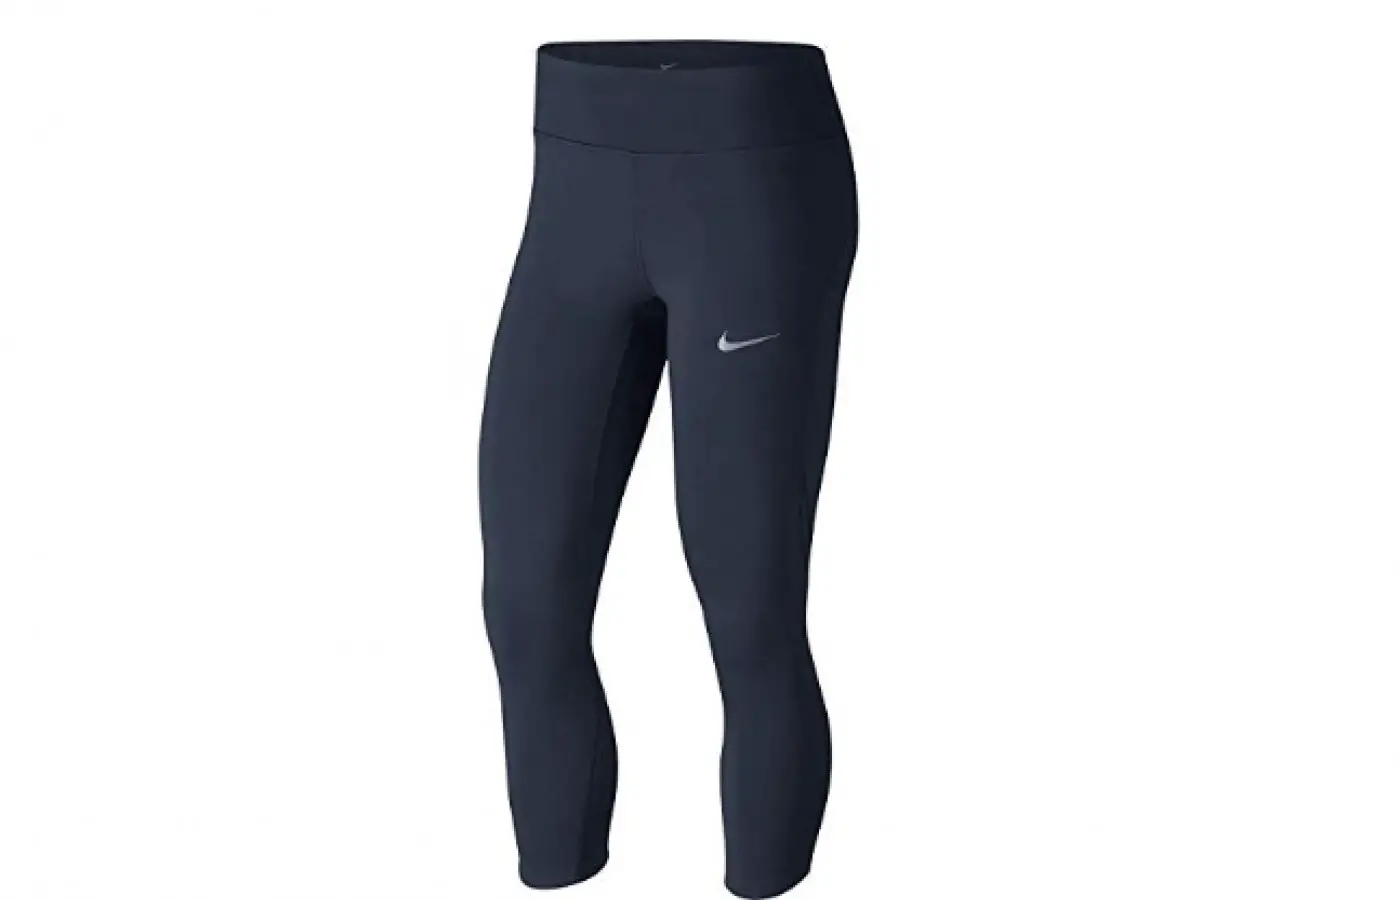 Nike Epic Lux Tights Reviewed 2019 GearWeAre